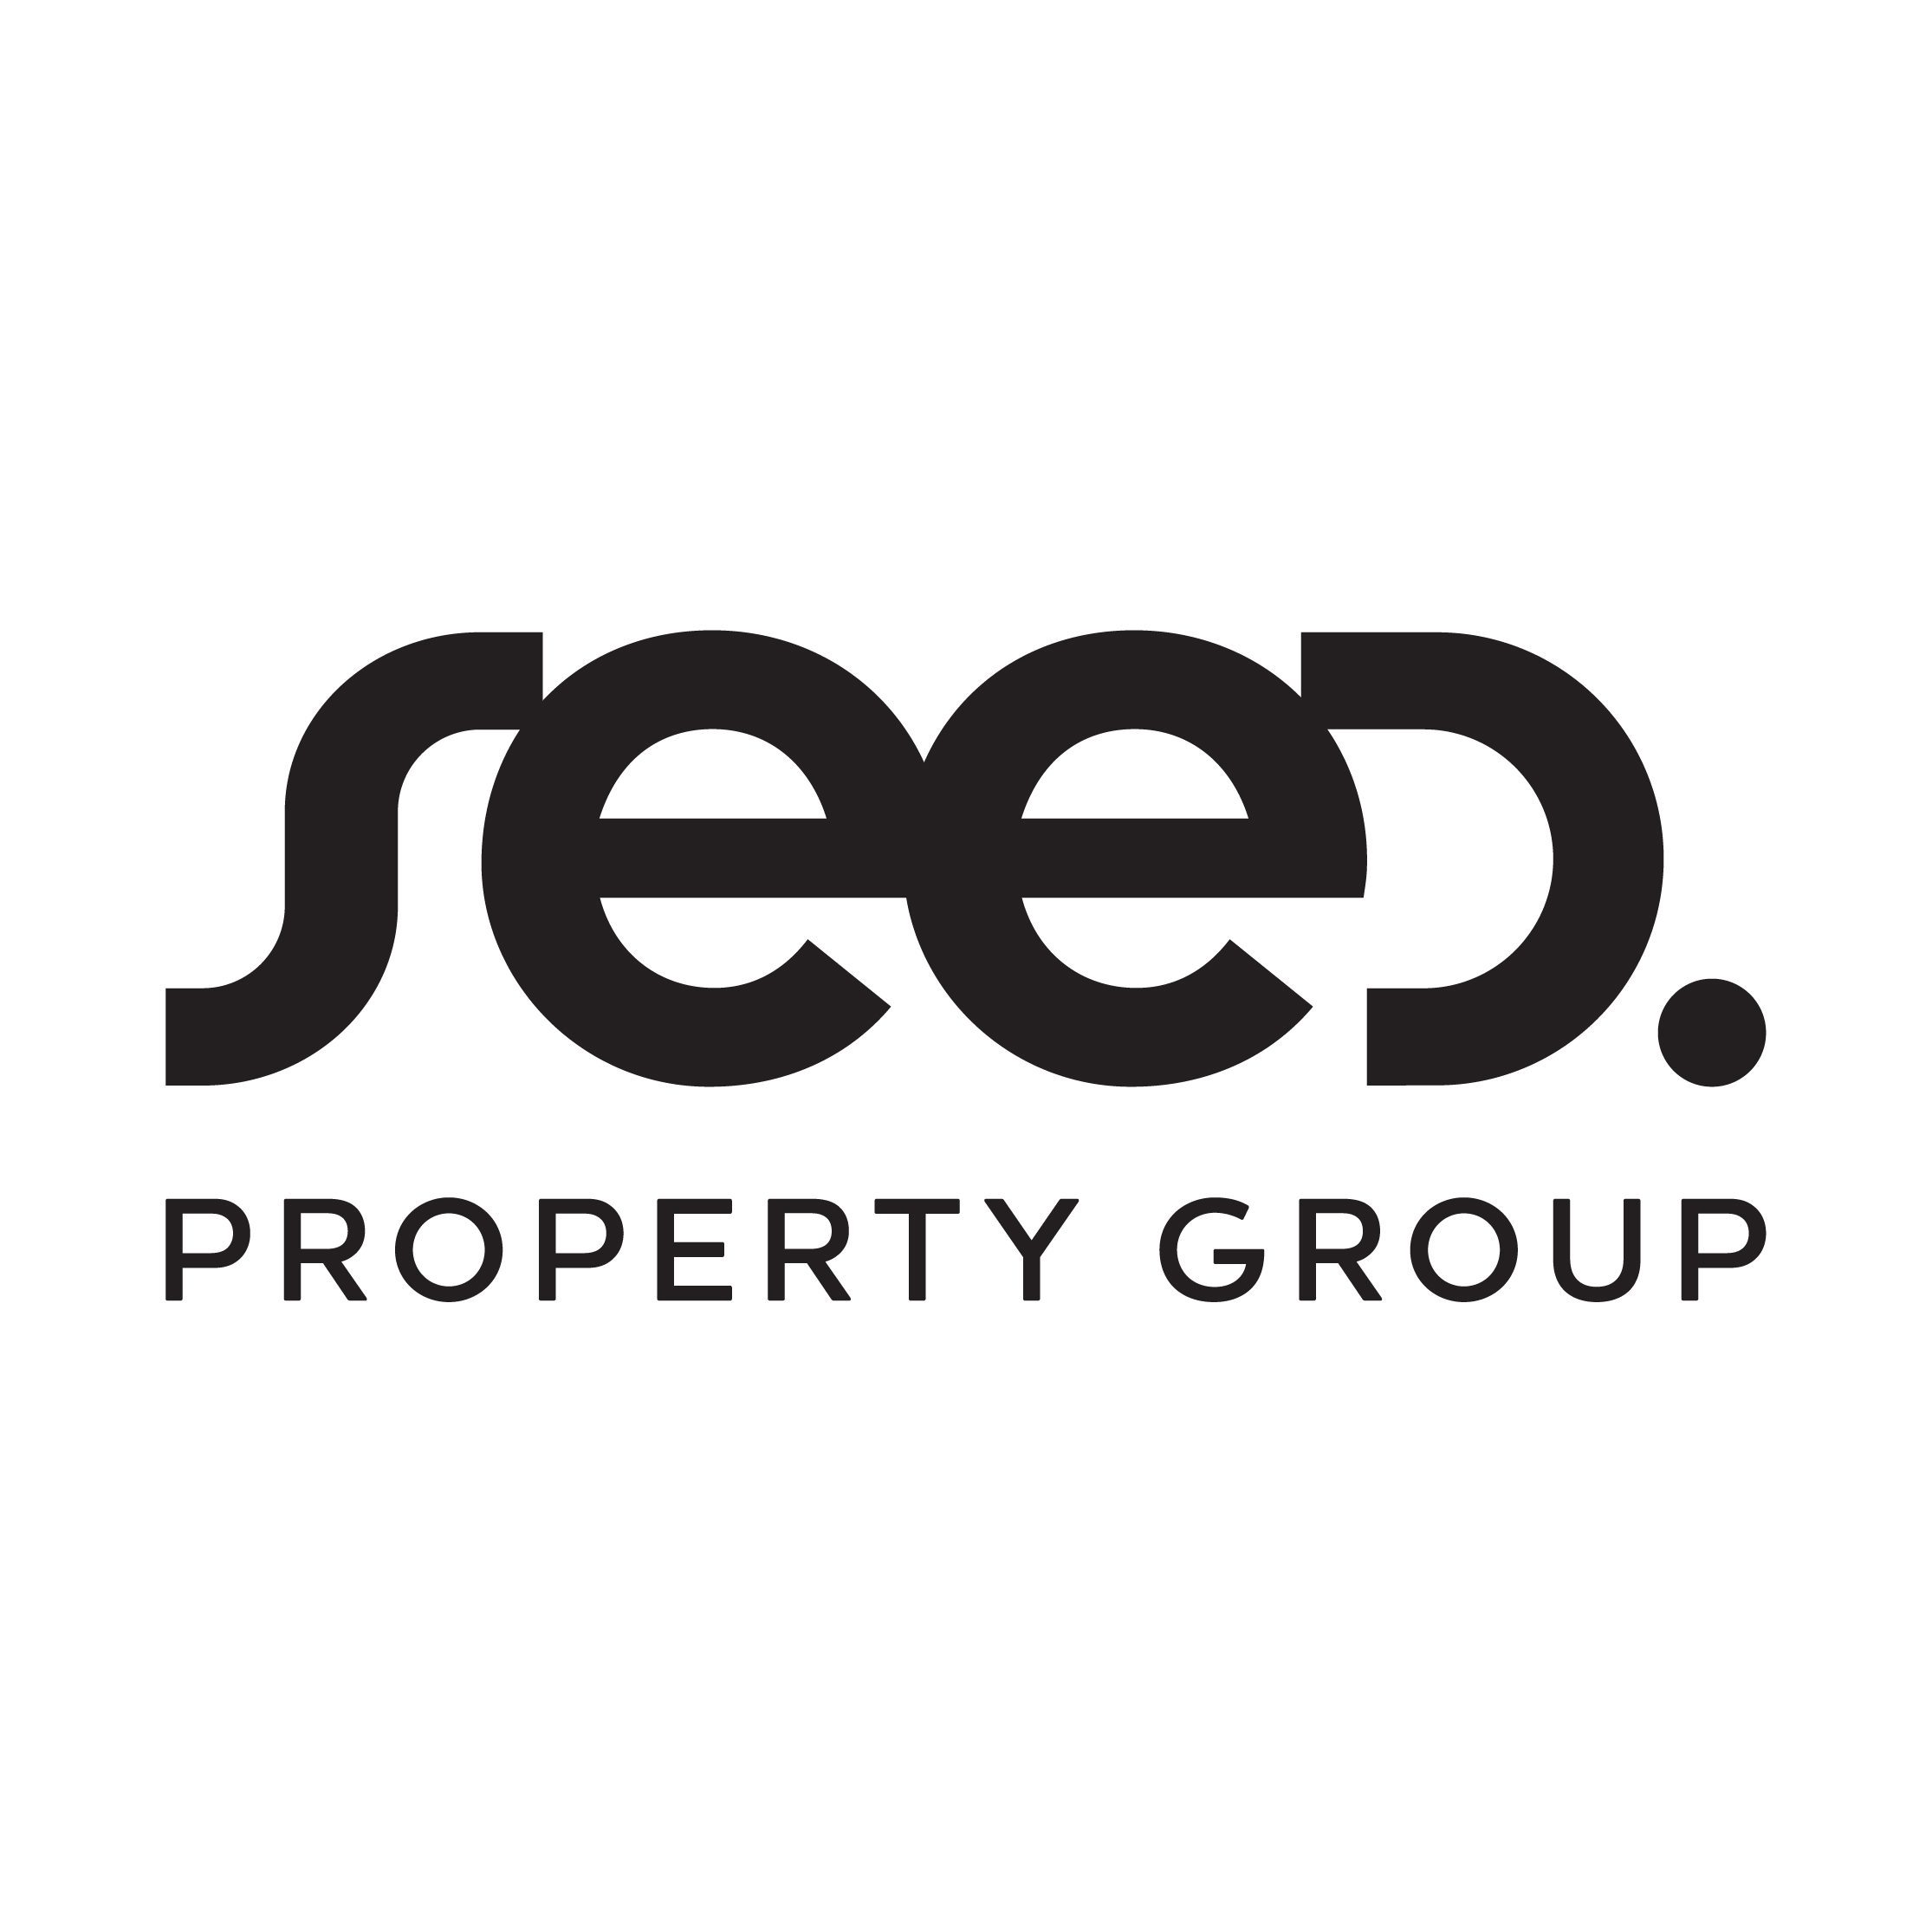 Seed Property Group